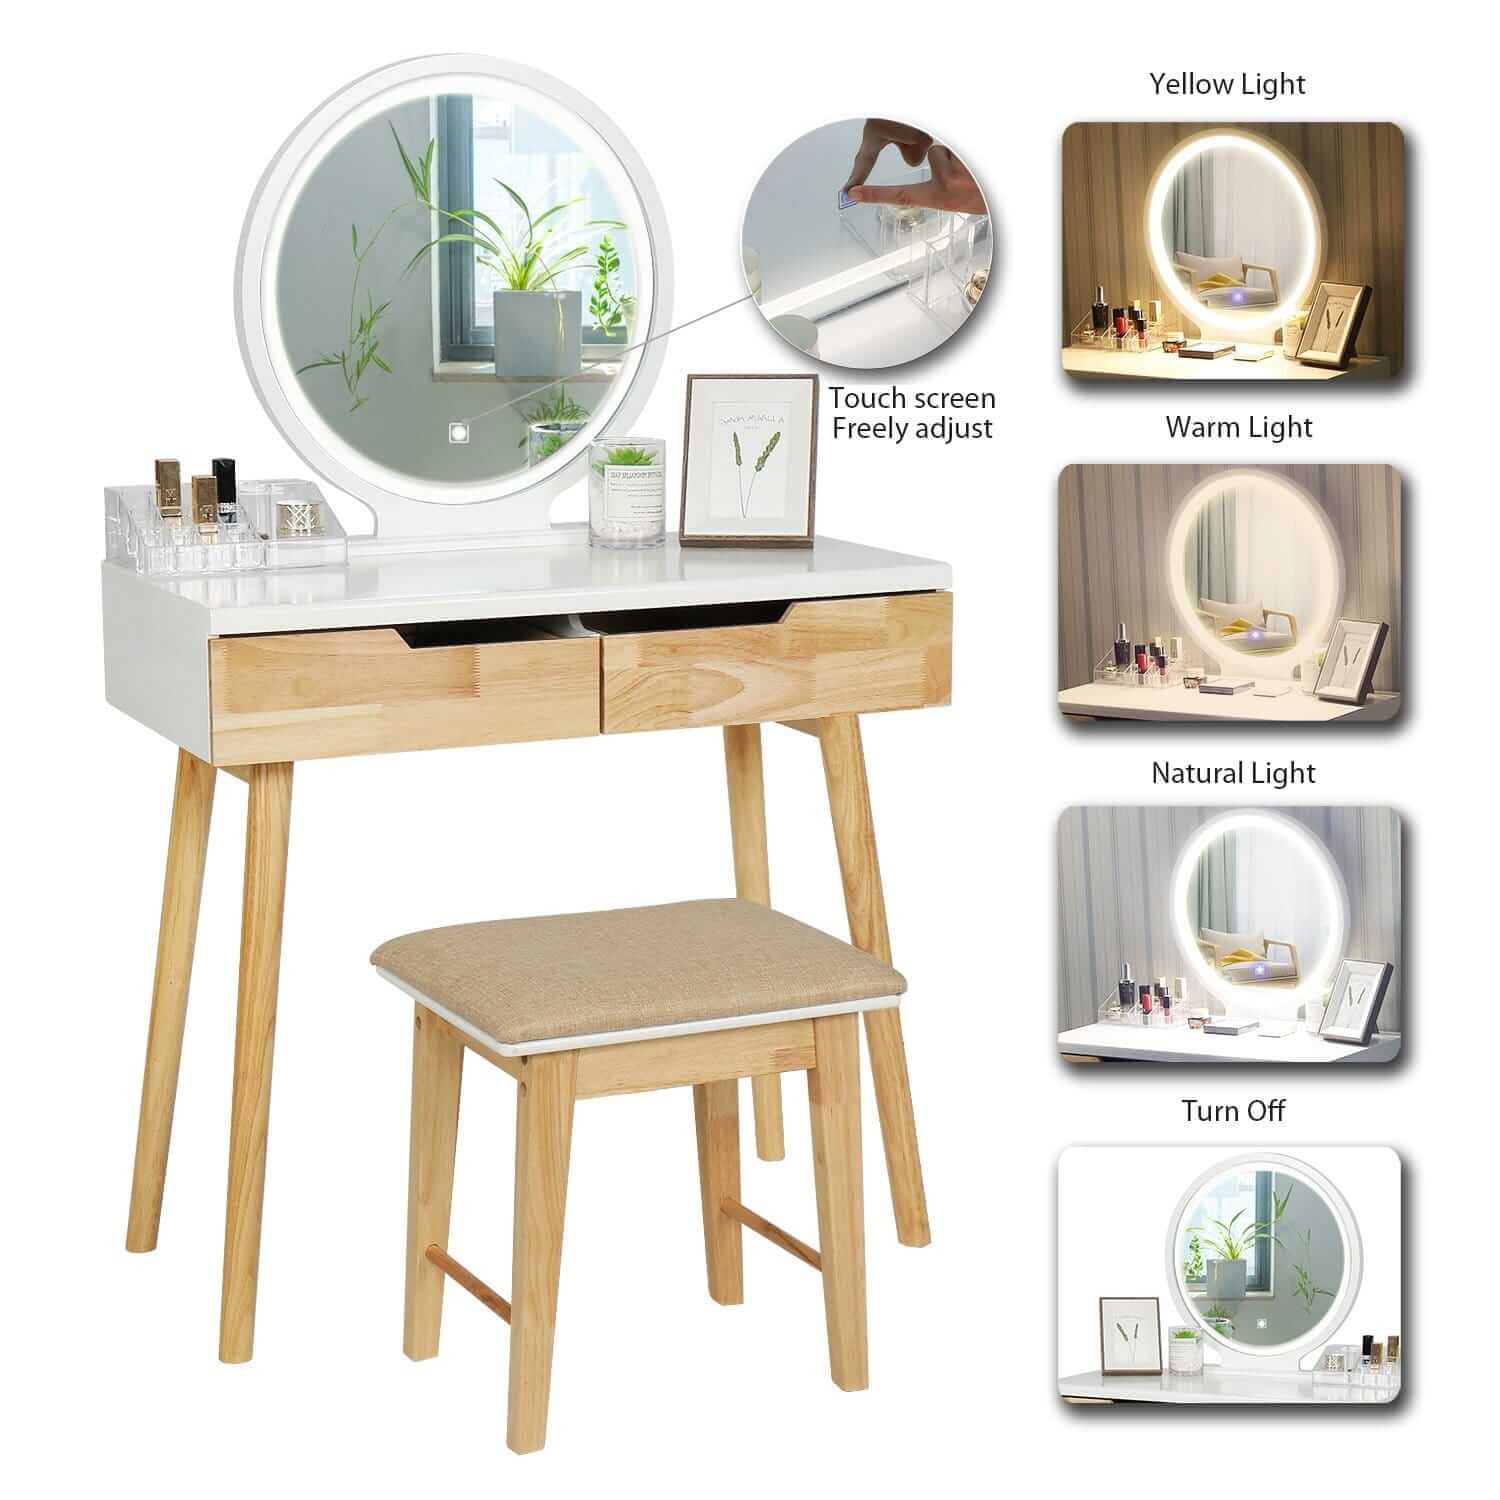 Elecwish Makeup dressing table 3 Lighting Modes Round Mirror Wood Dressing Table 2 Drawers has 3 different brightness